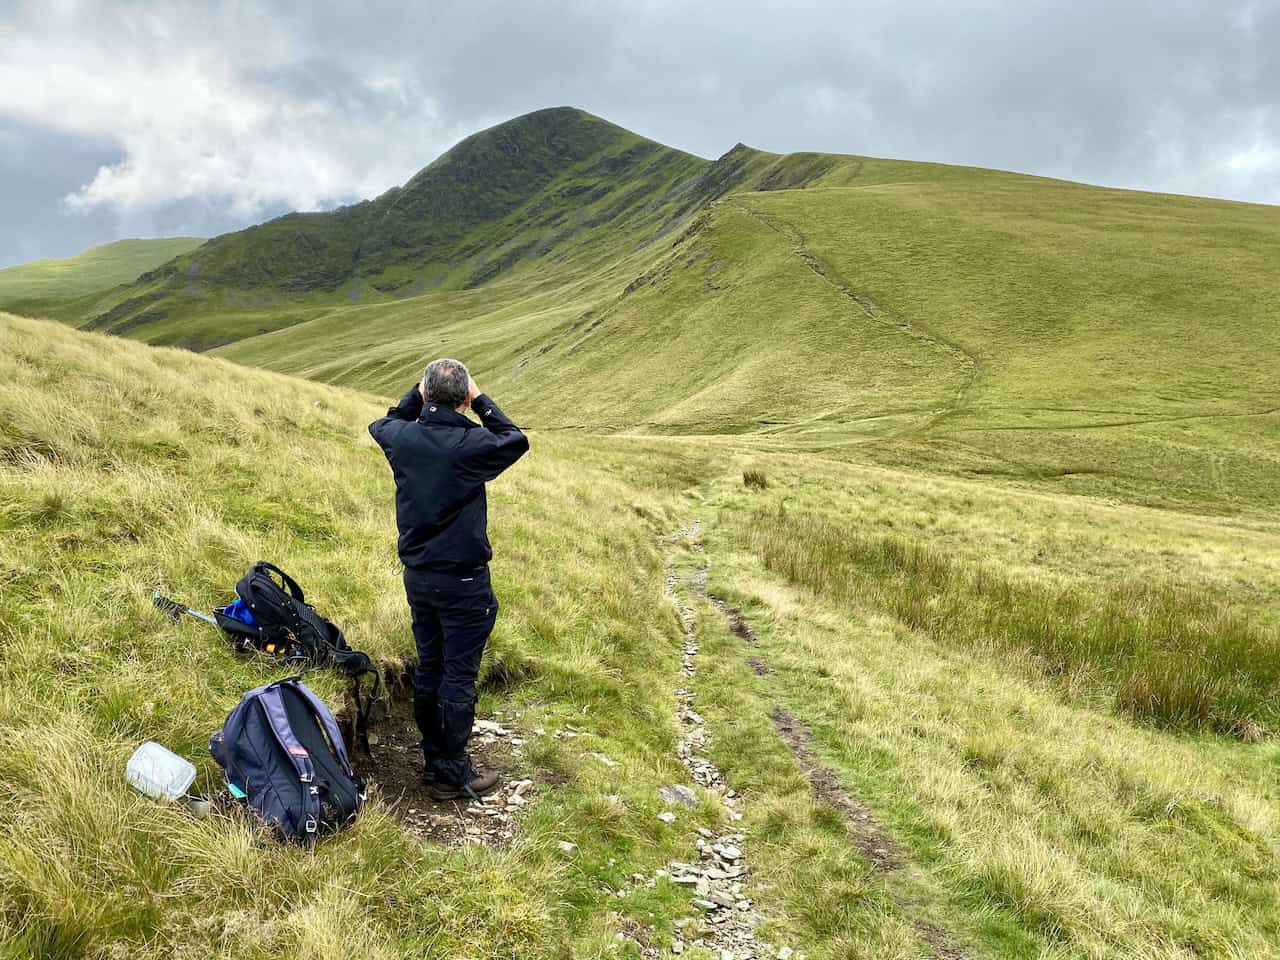 Mark looks back towards Blencathra as we make our way over to Bannerdale Crags.